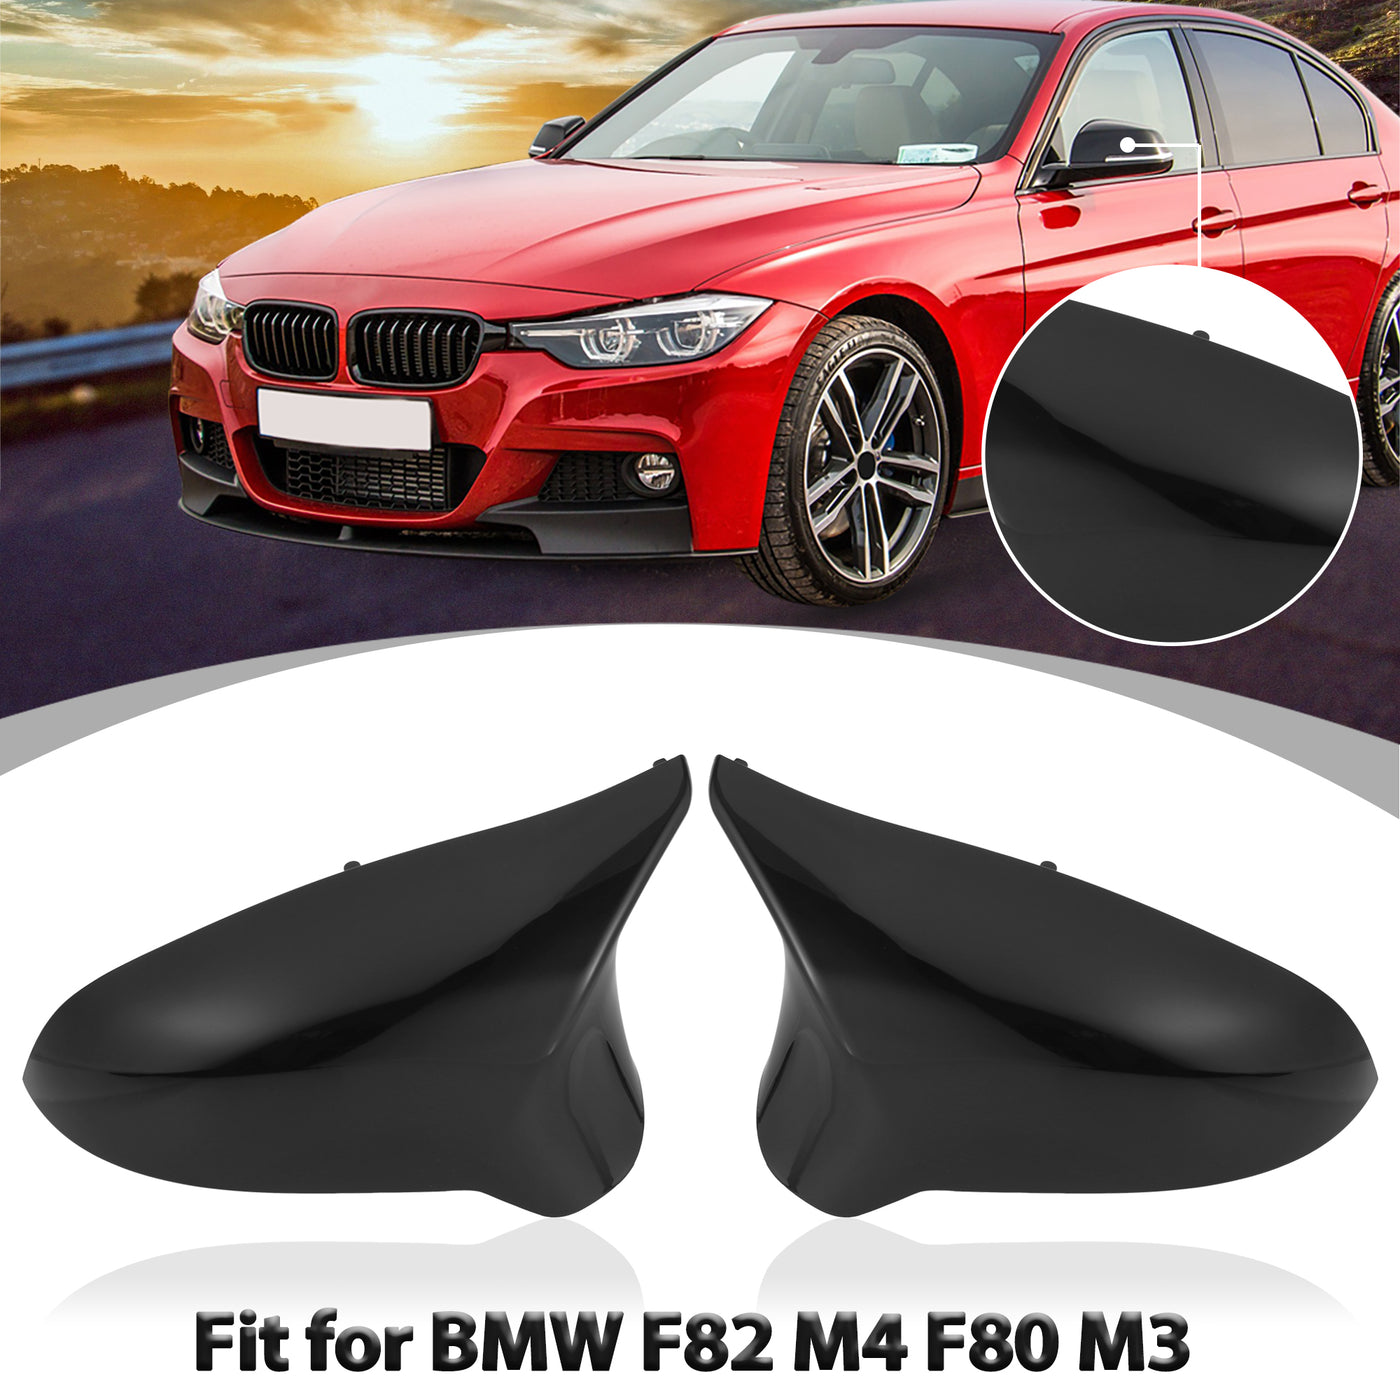 X AUTOHAUX Pair Exterior Rear View Mirror Housing Door Wing Mirror Cover Cap Glossy Black for BMW F80 M3 F82 M4 Sedan Coupe Convertible 2015-2019